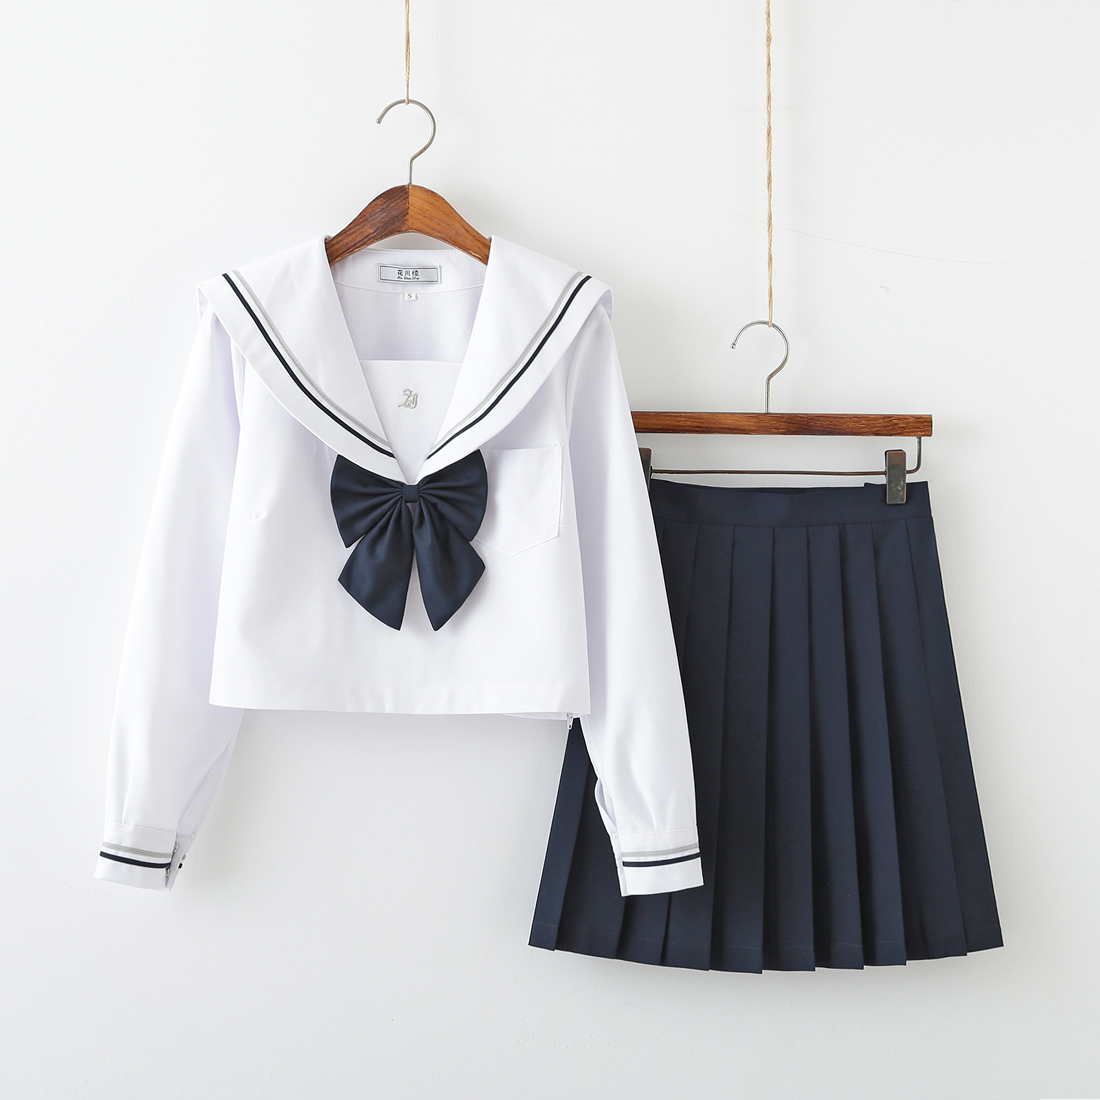 Long Sleeves short skirts(Bow Tie)